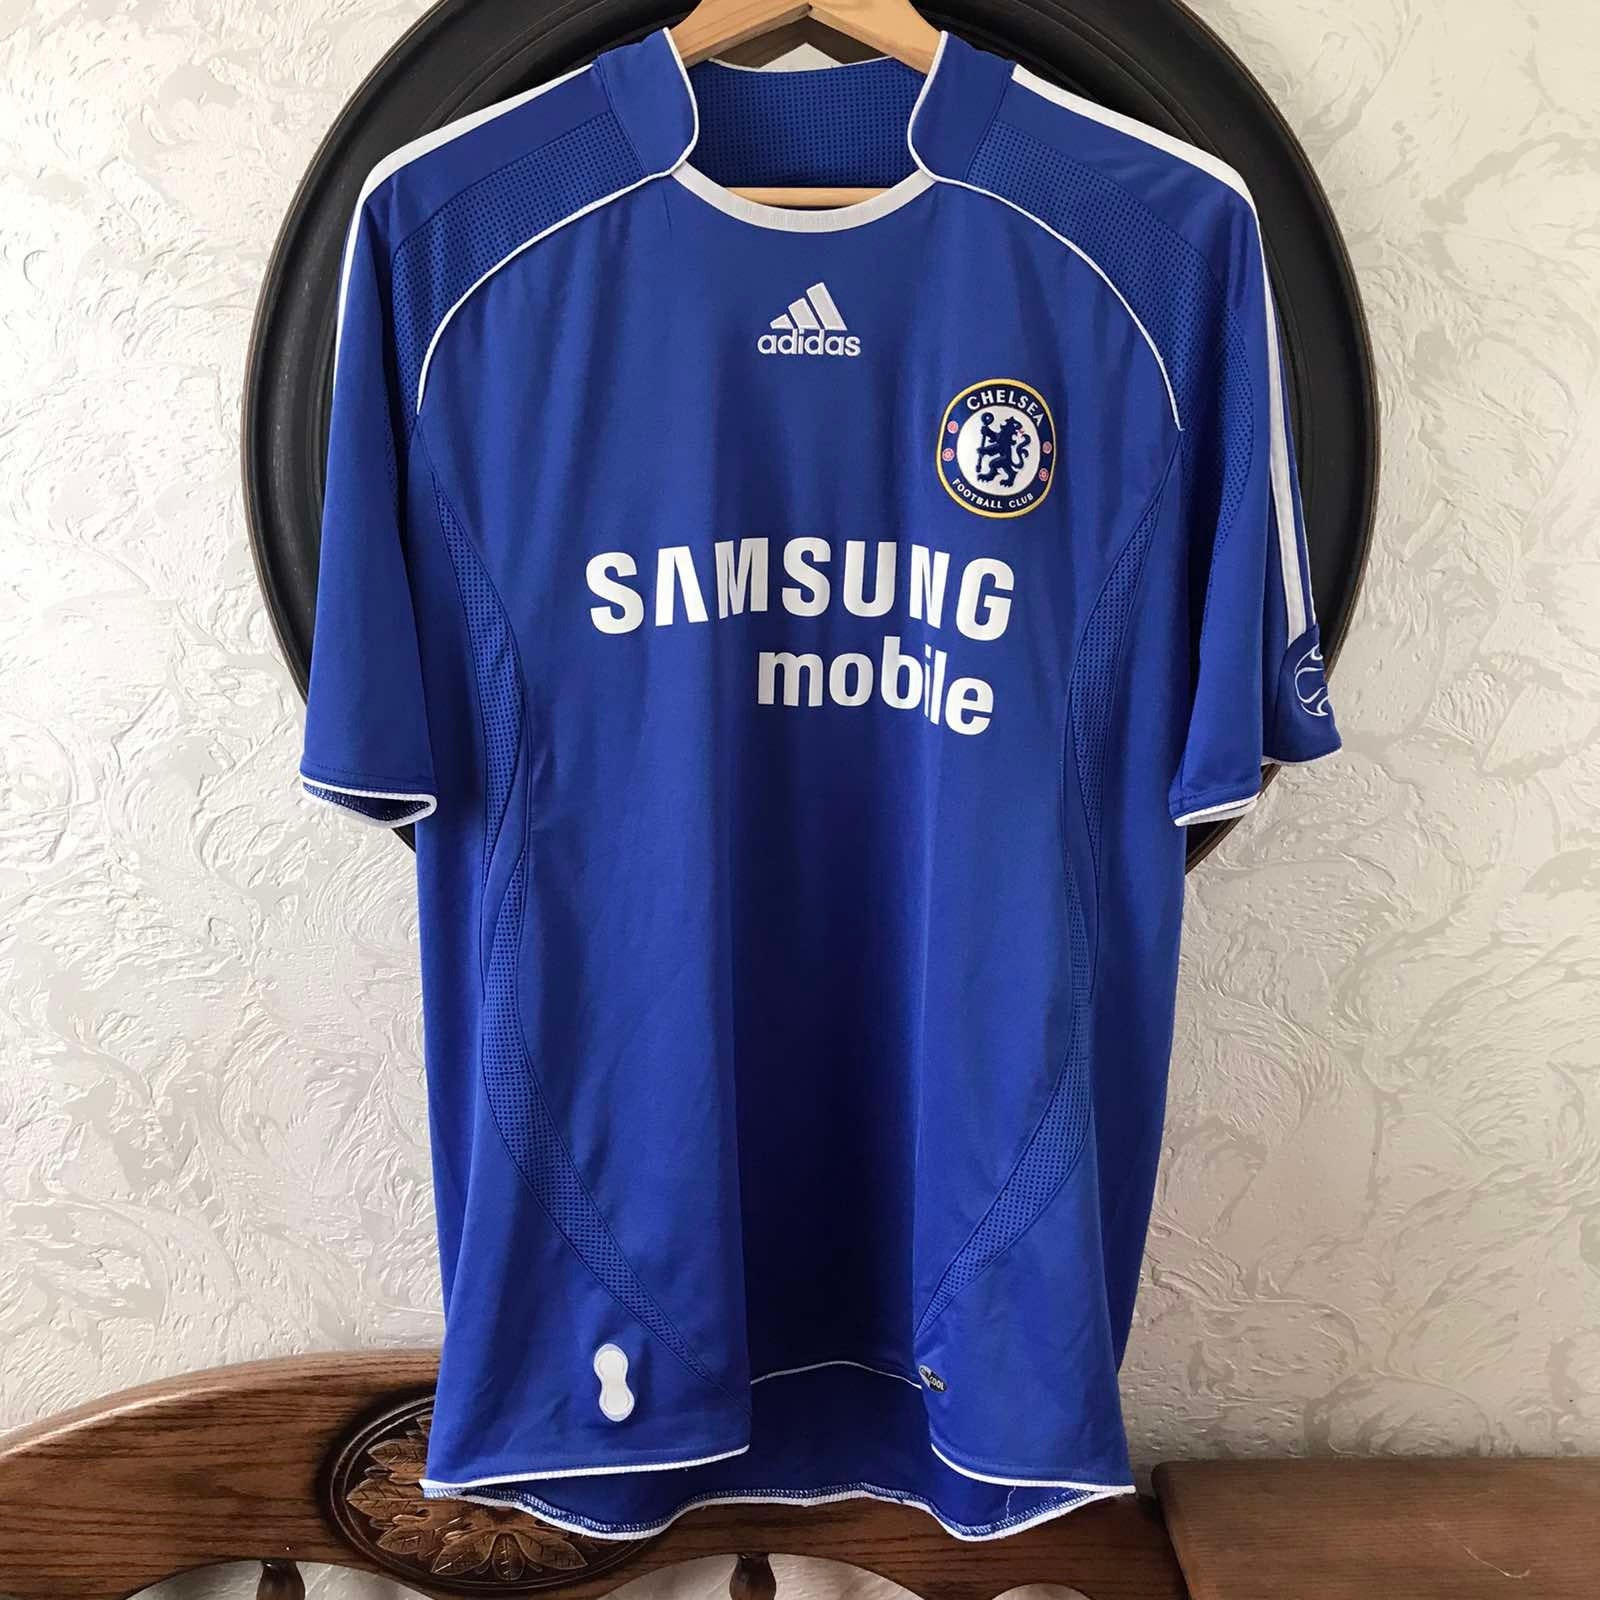 Chelsea Jerseys: 2006-2007 white and blue away jersey picture